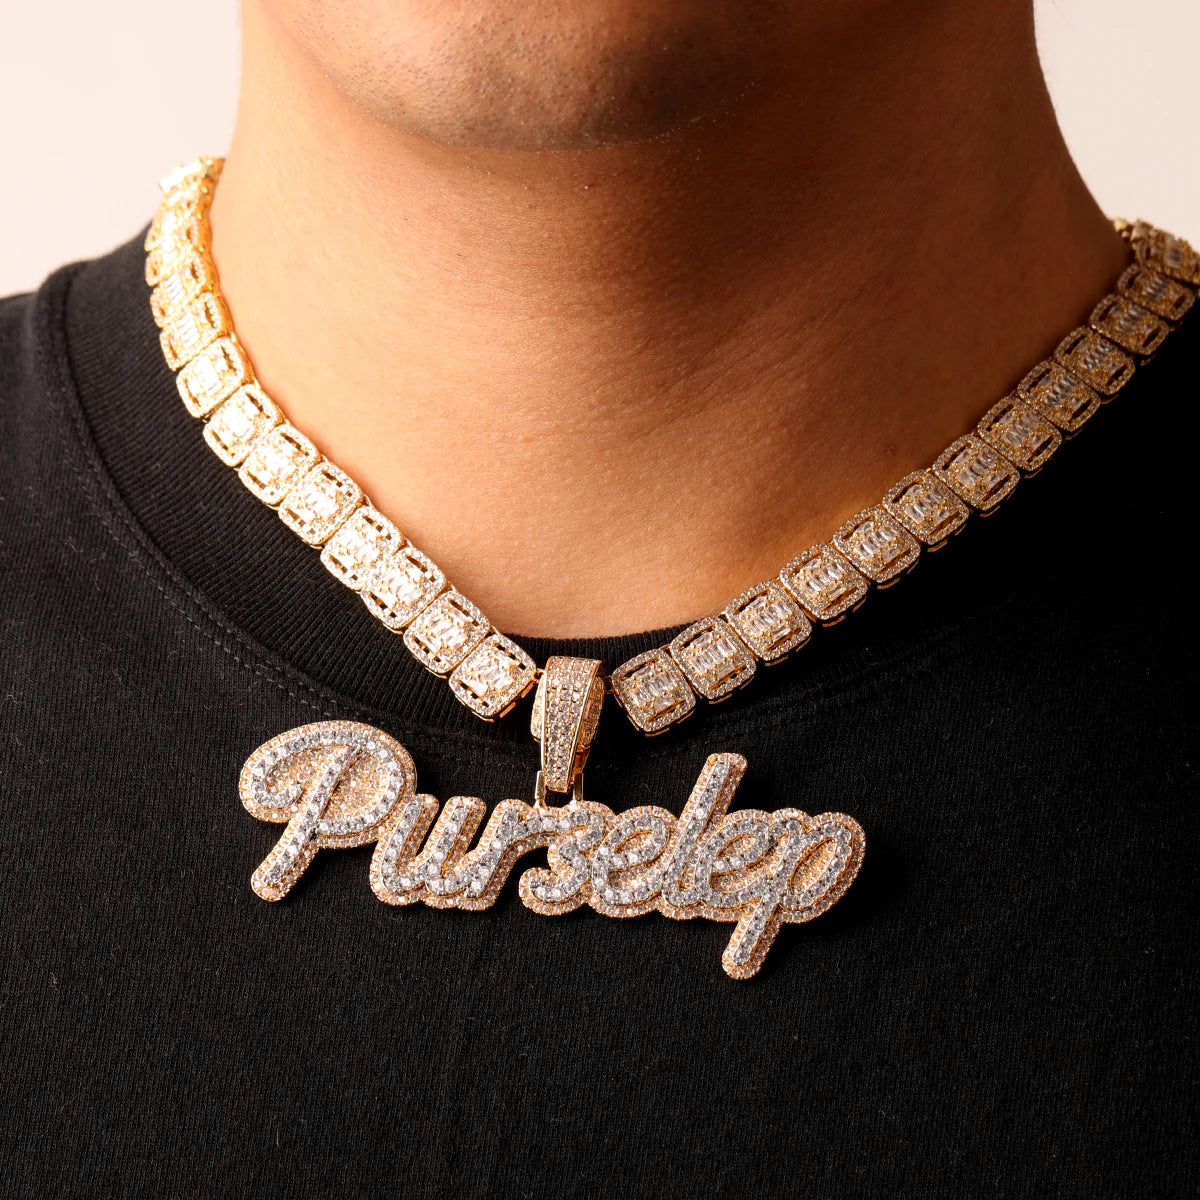 IceBox DC: ✨ Elevate Your Name Game ✨ Men's Custom Cursive "SILVER" Name Necklace